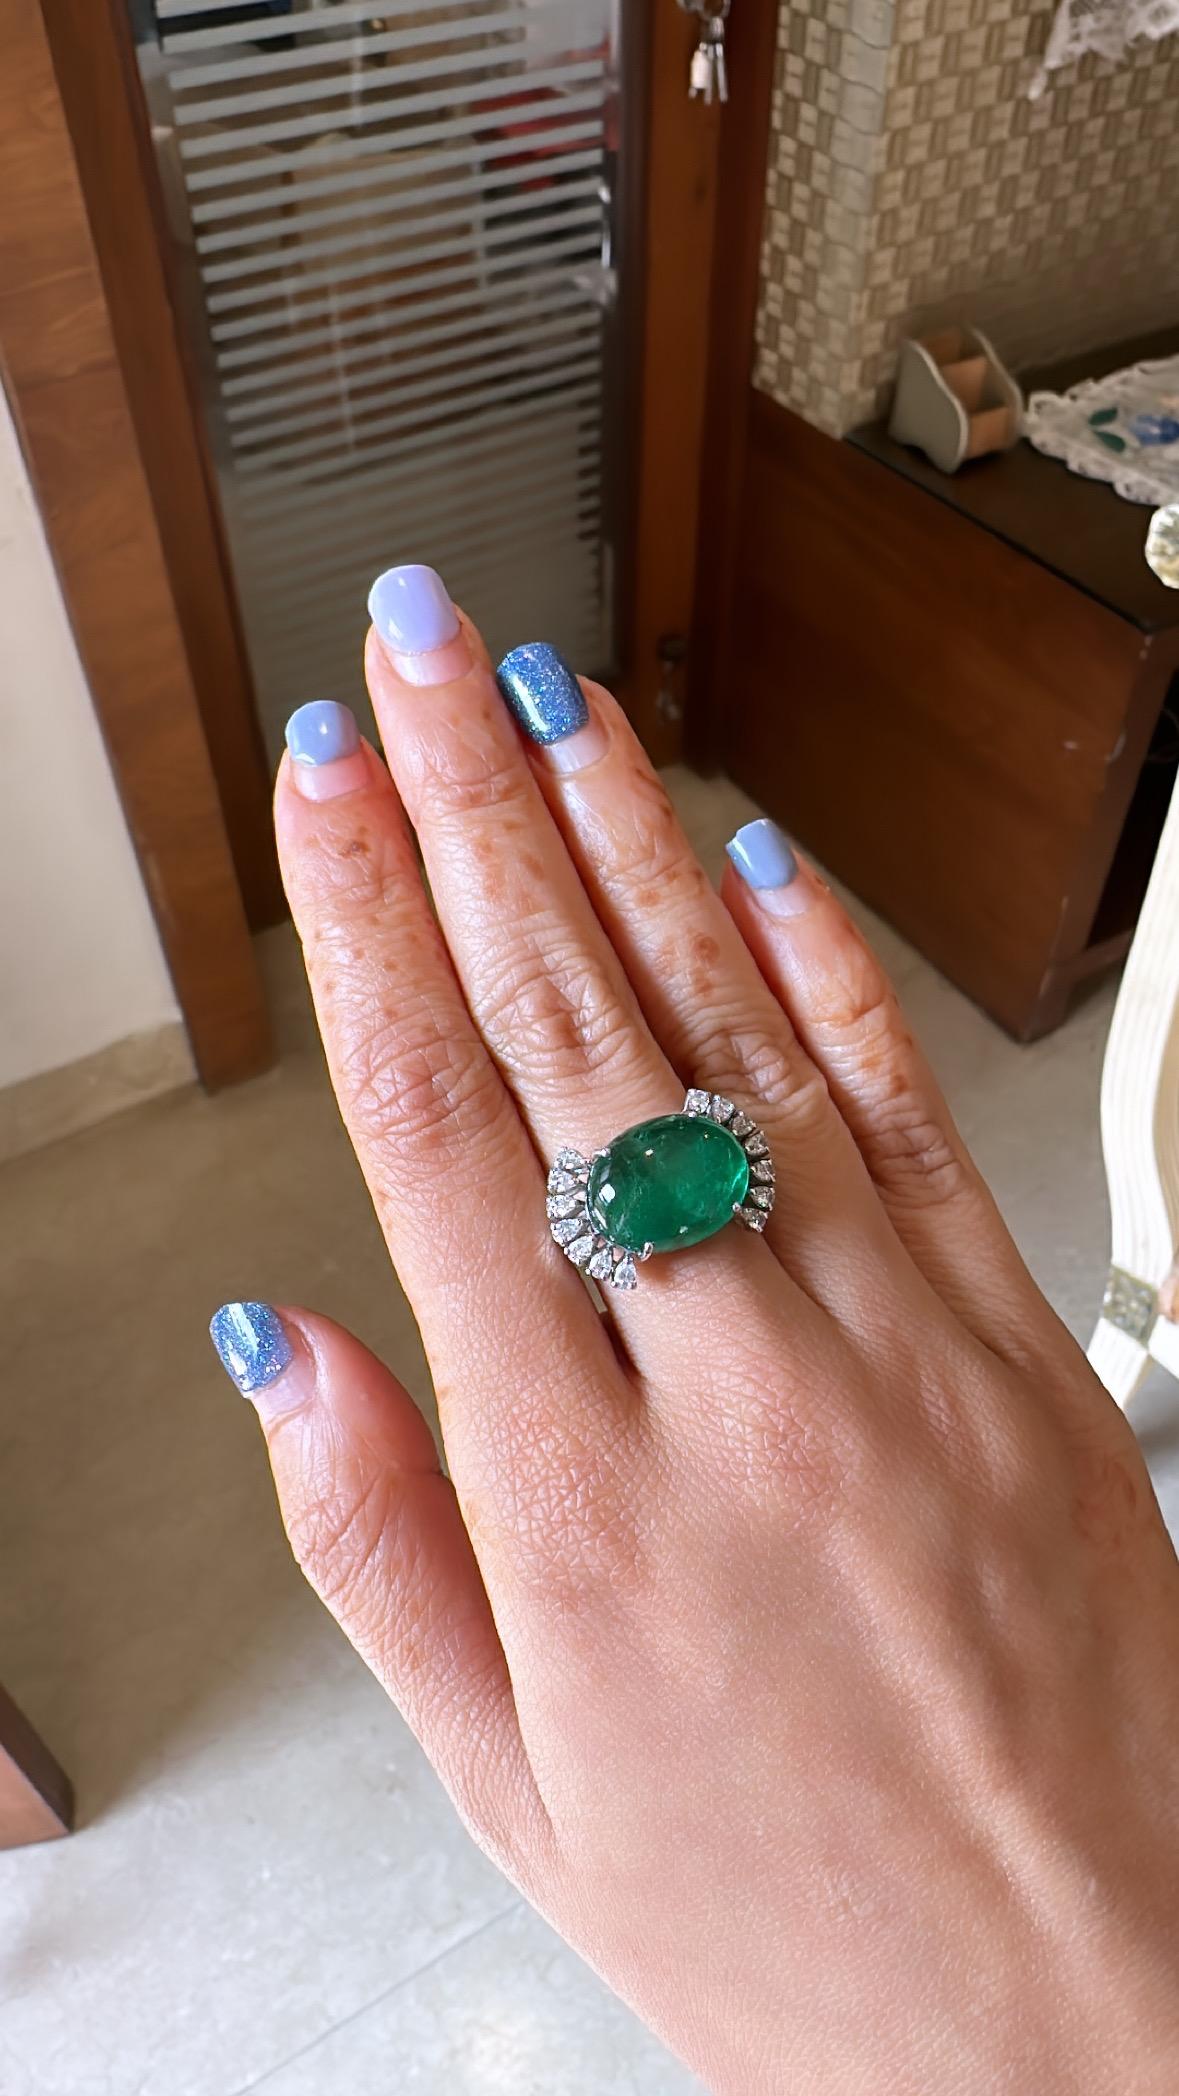 A very gorgeous Emerald Engagement / Cocktail Ring set in 18K White Gold & Diamonds. The weight of the Emerald cabochon is 11.51 carats. The Emerald is completely natural, without any treatment and of Zambian origin. The weight of the Diamonds is